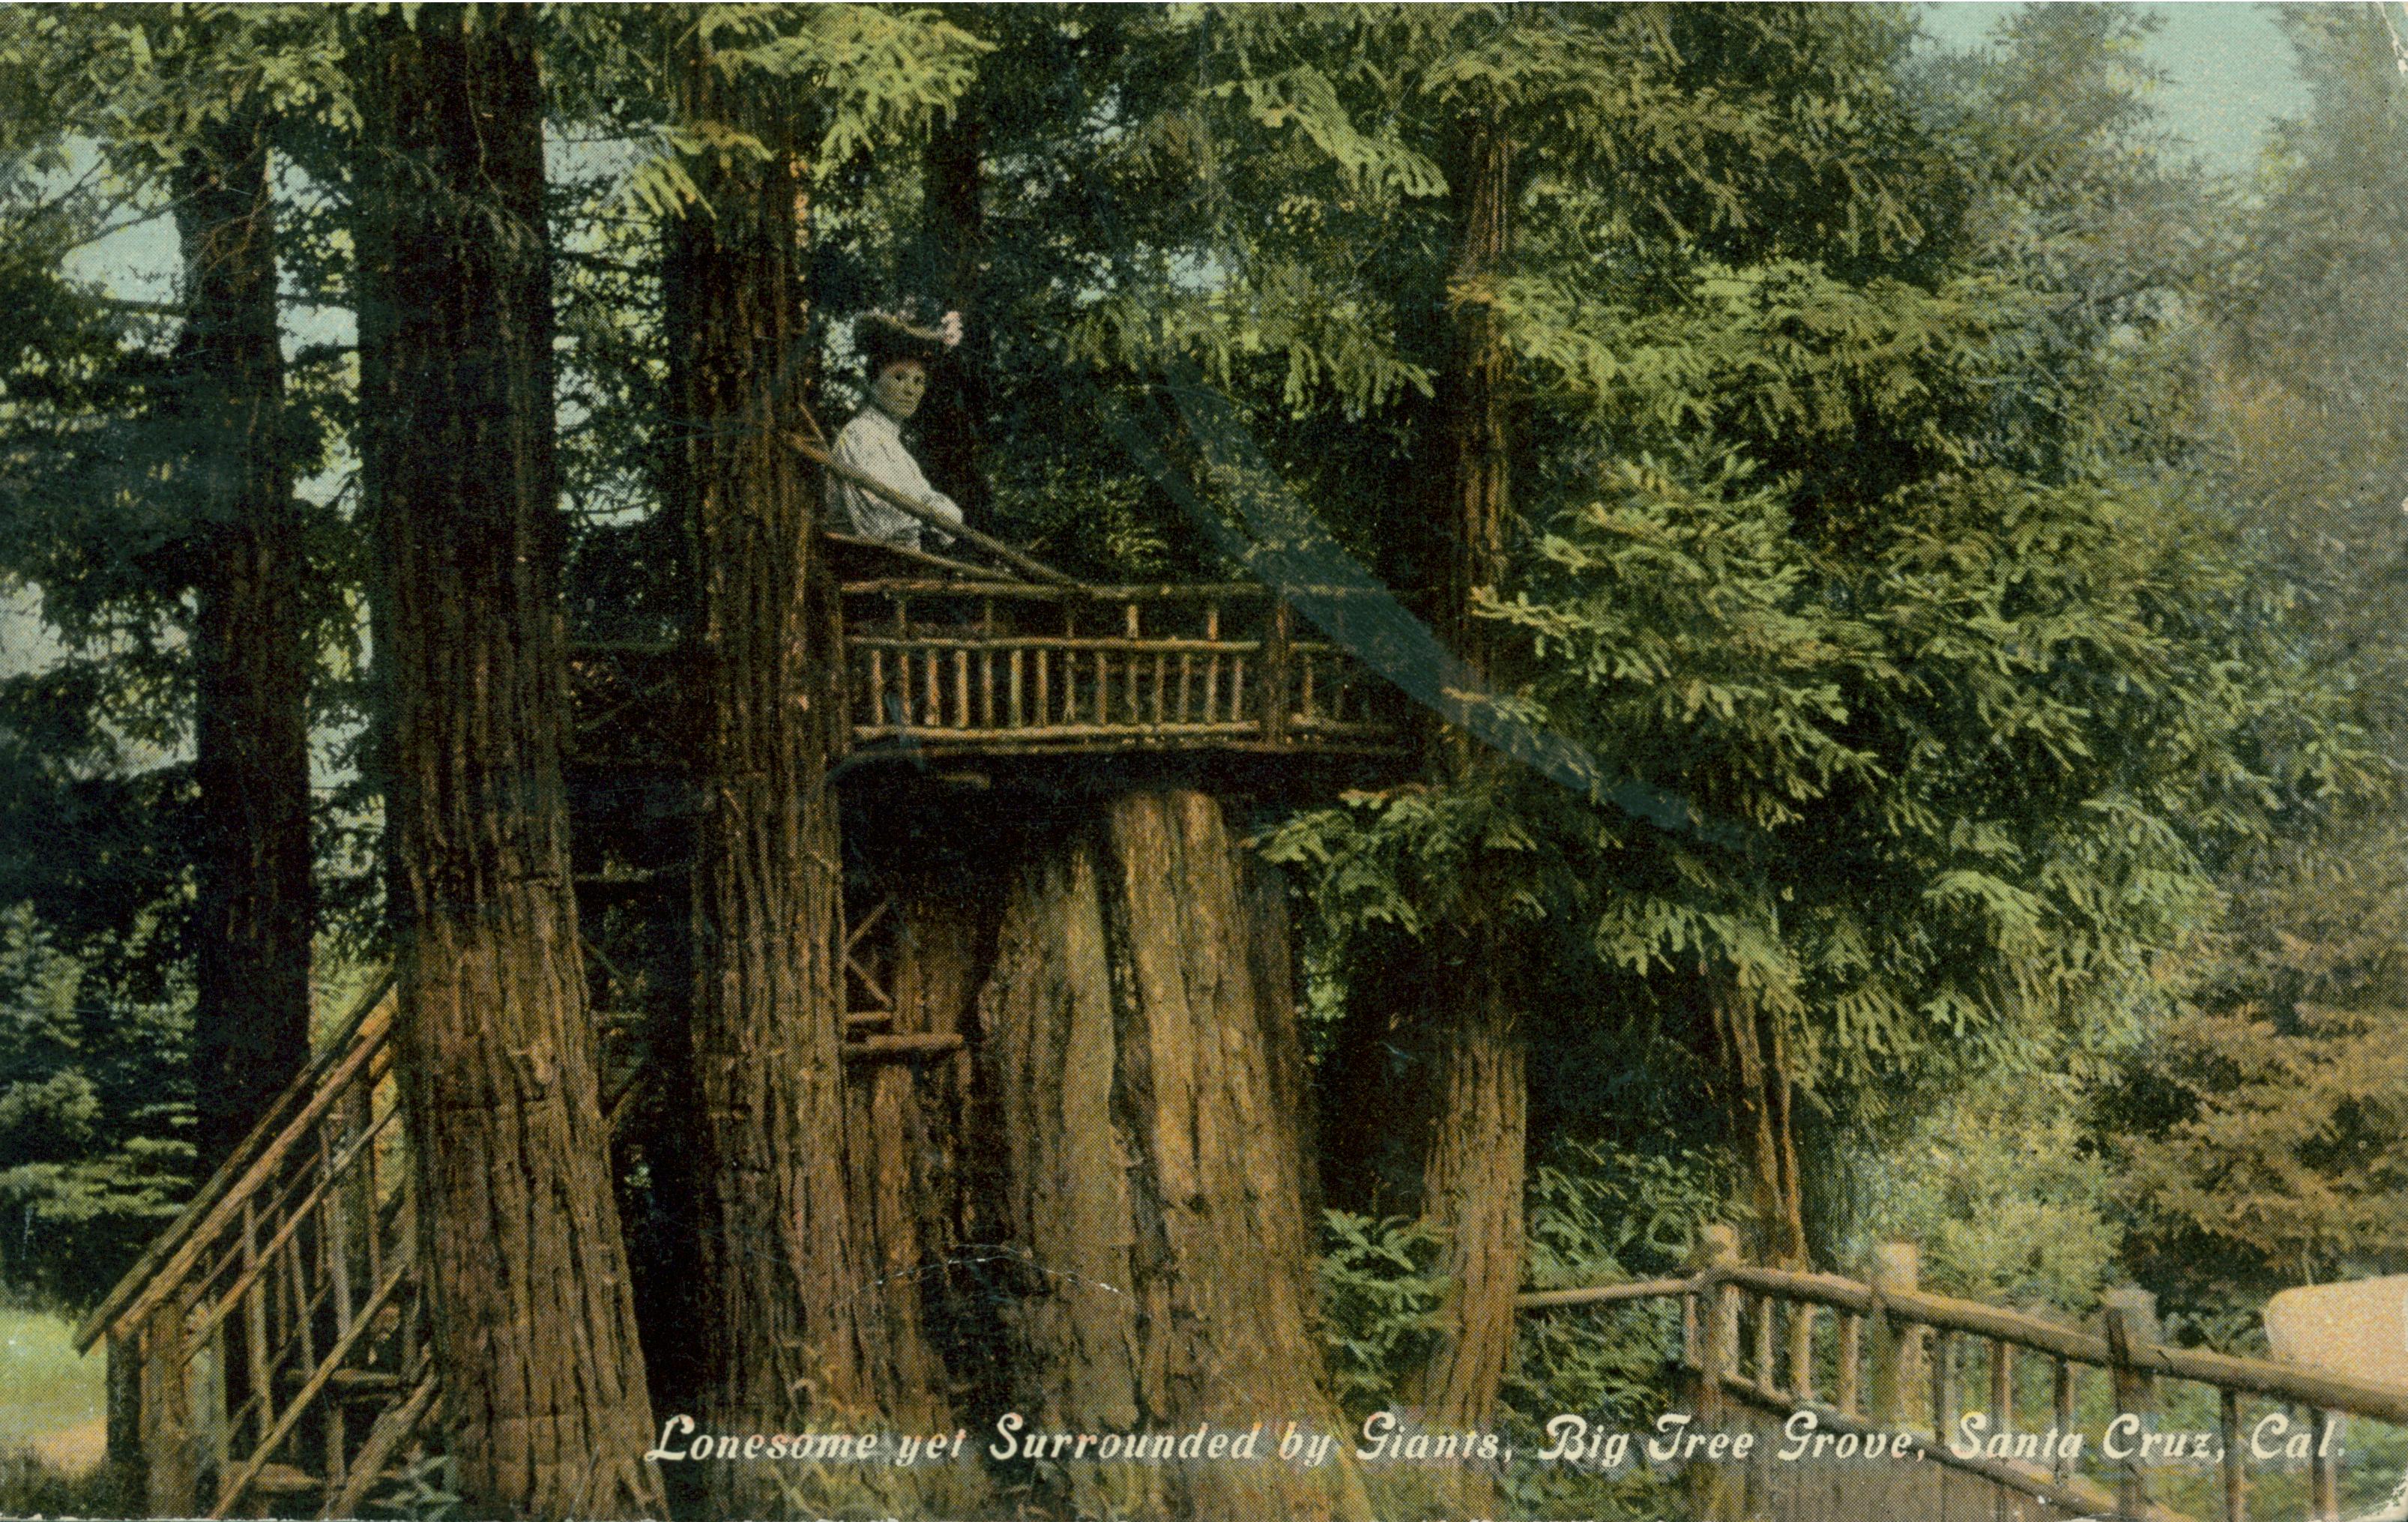 Shows a woman seated on a platform built in a tree